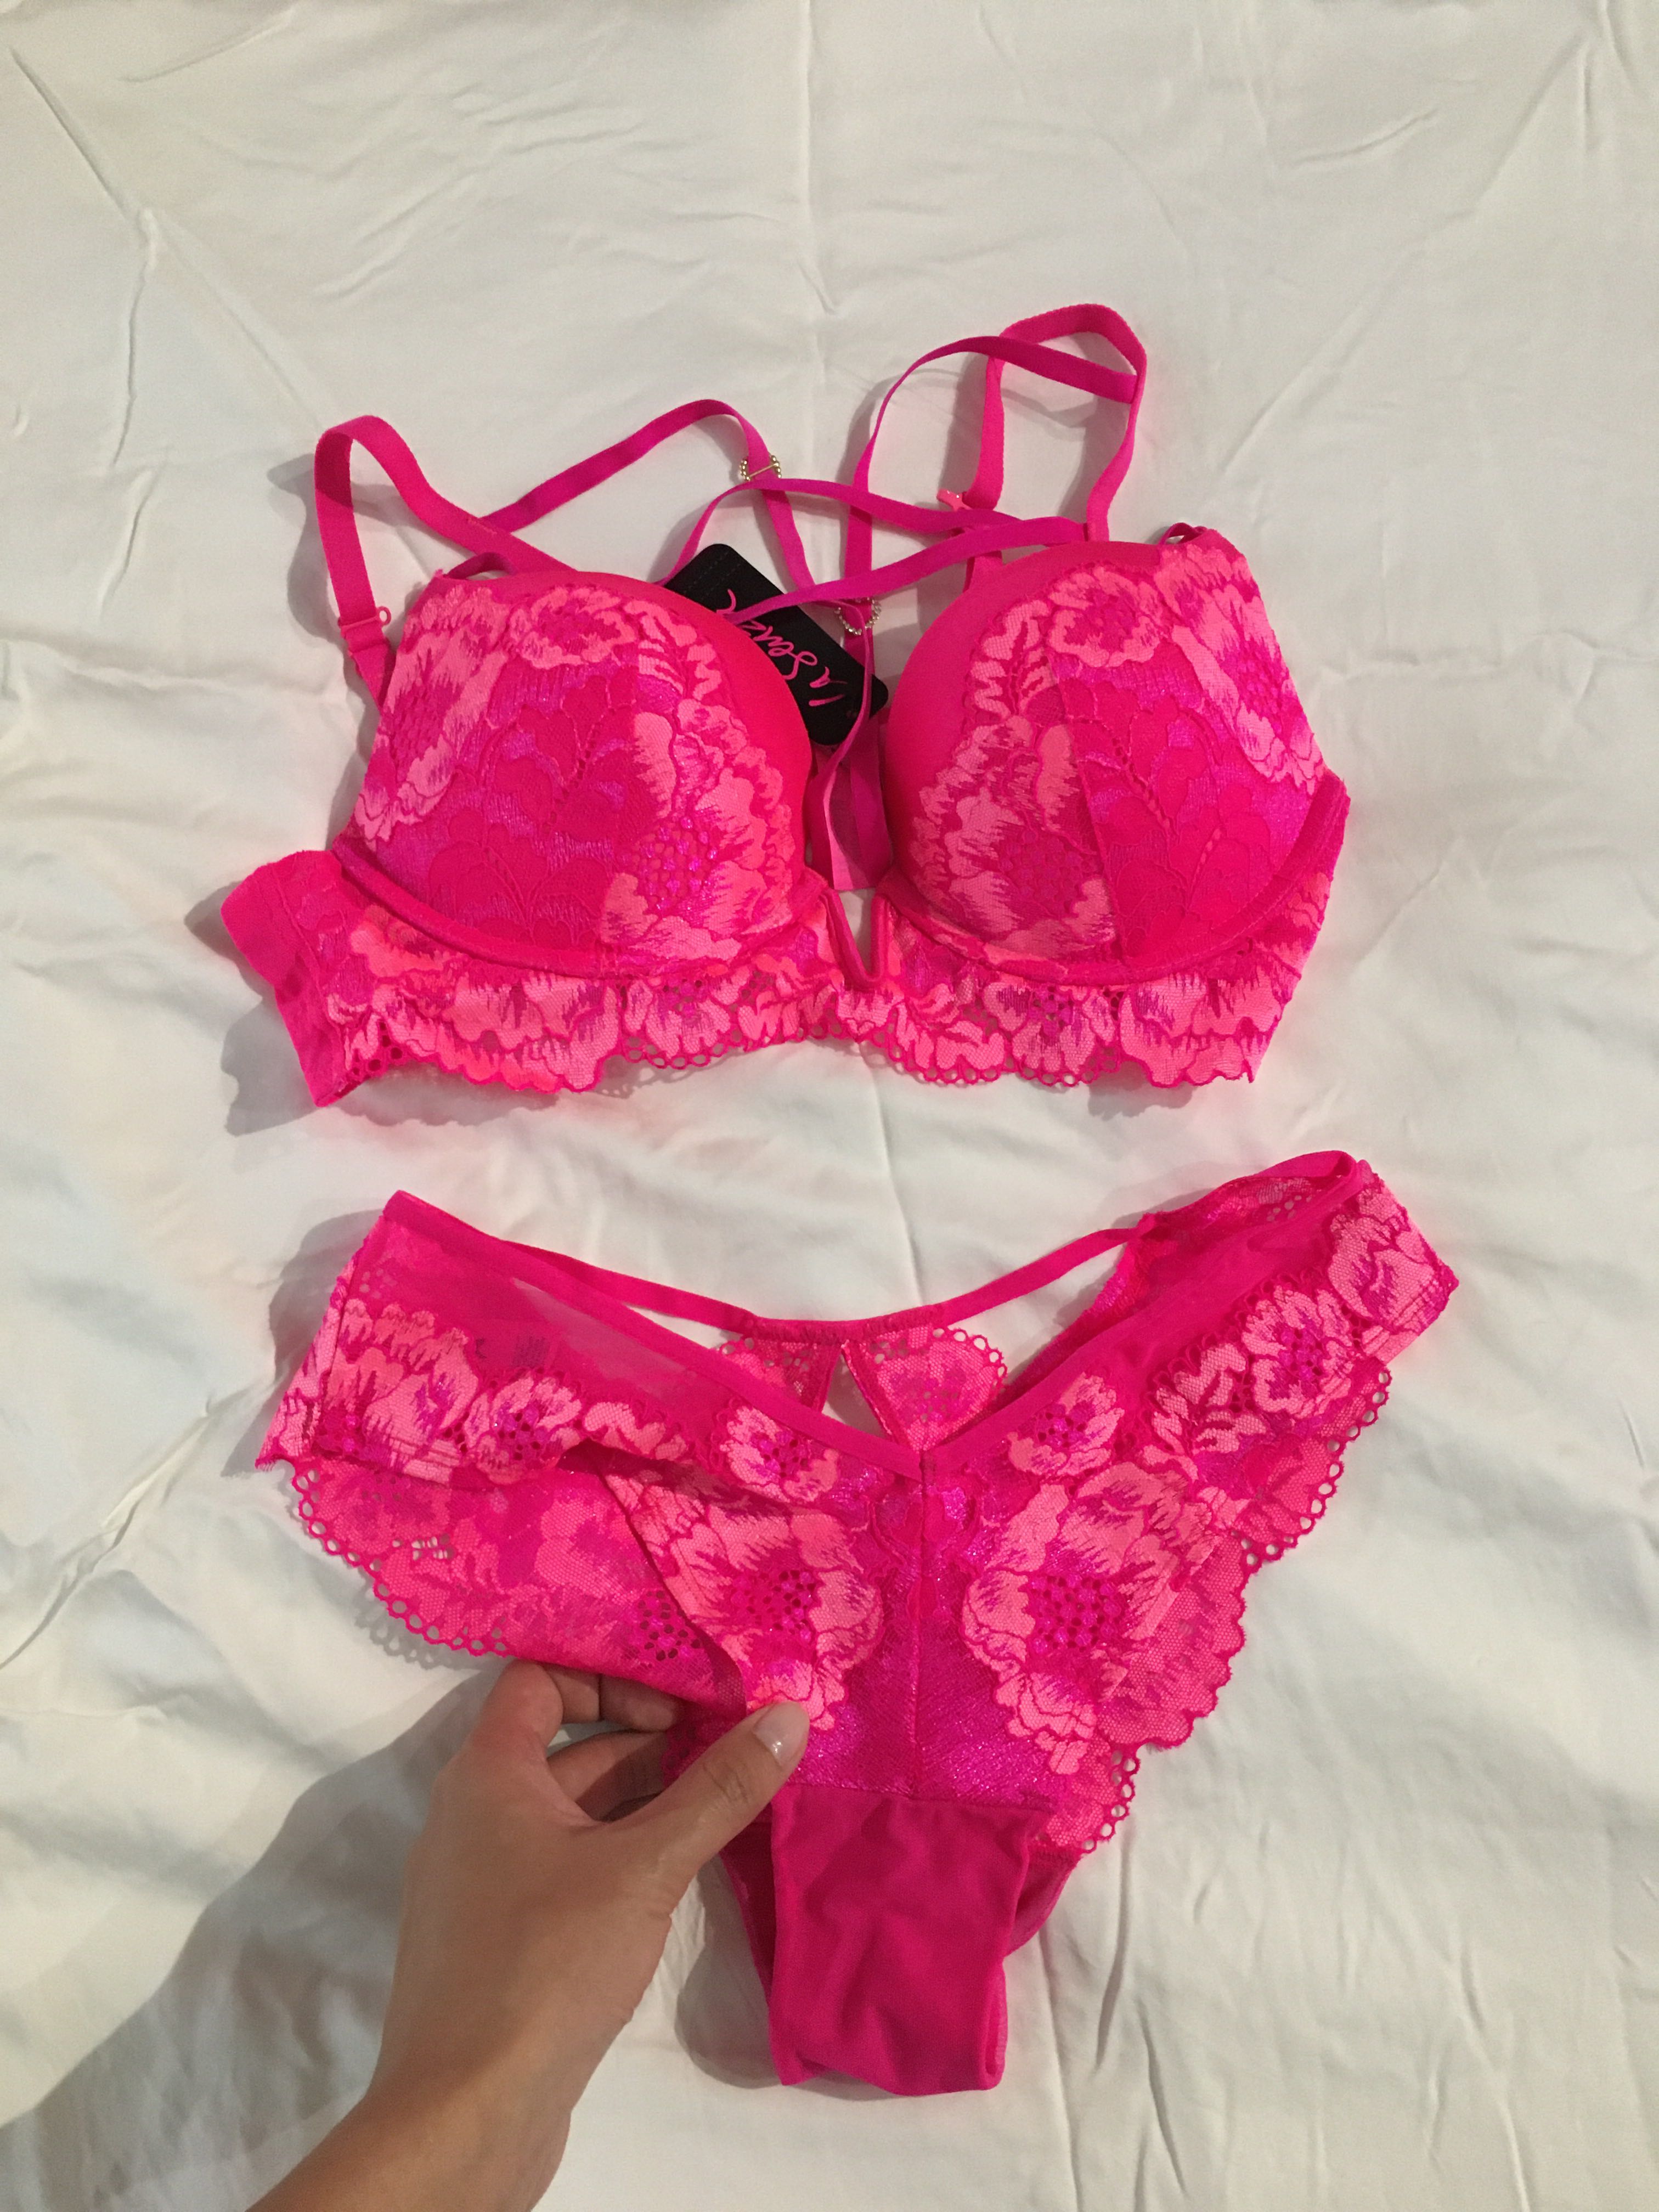 https://media.karousell.com/media/photos/products/2022/2/17/la_senza__lace__neon_pink__pus_1645078801_a72a4268.jpg